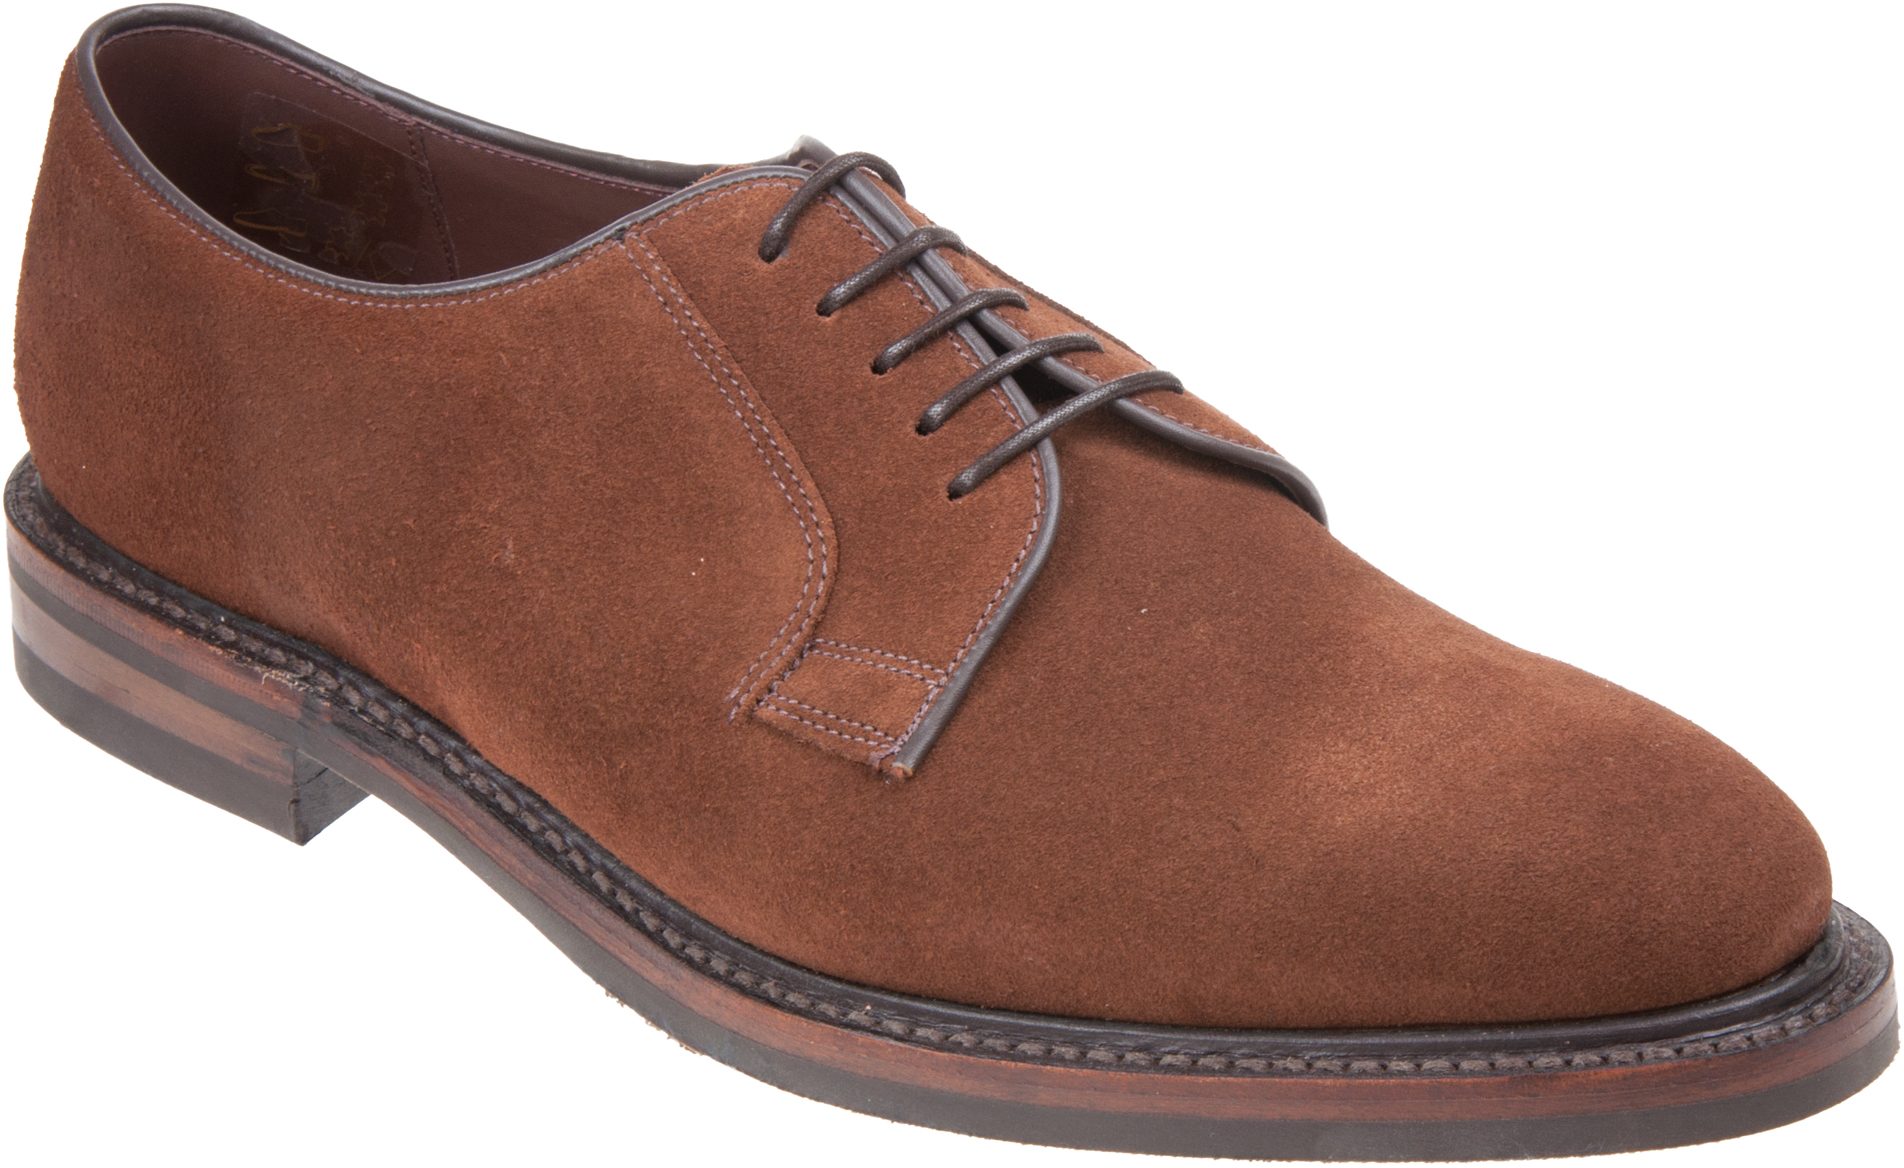 Loake Troon Brown Suede - Formal Shoes - Humphries Shoes